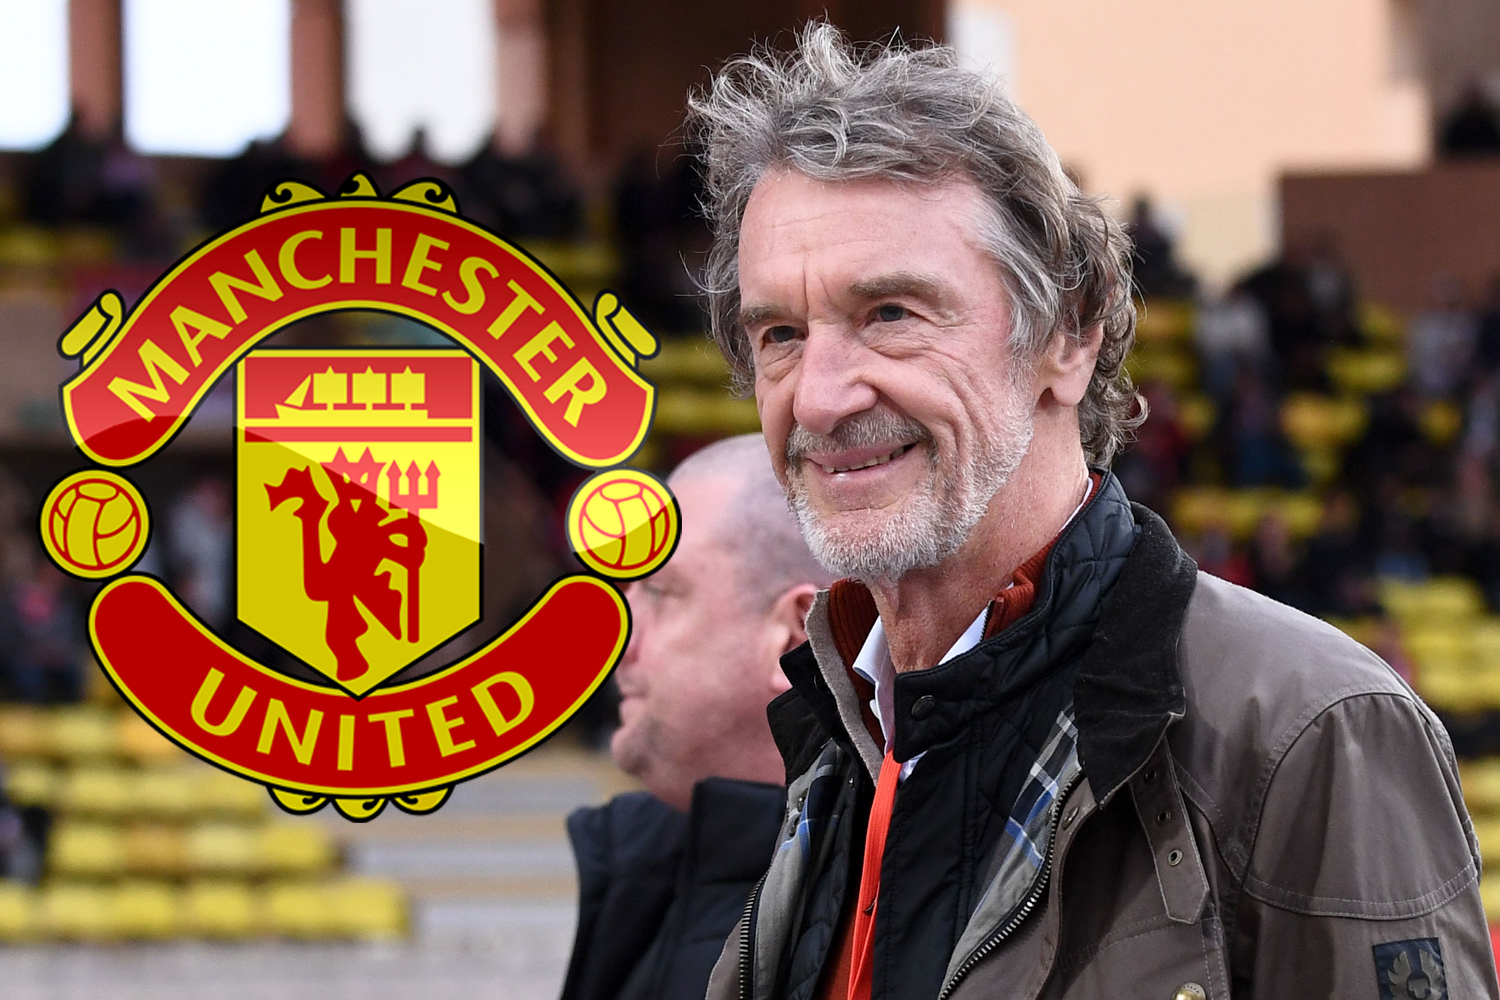 MU Are Set To Announce Sale Of 25% Club Shares To Billionaire Ratcliffe Early Next Week